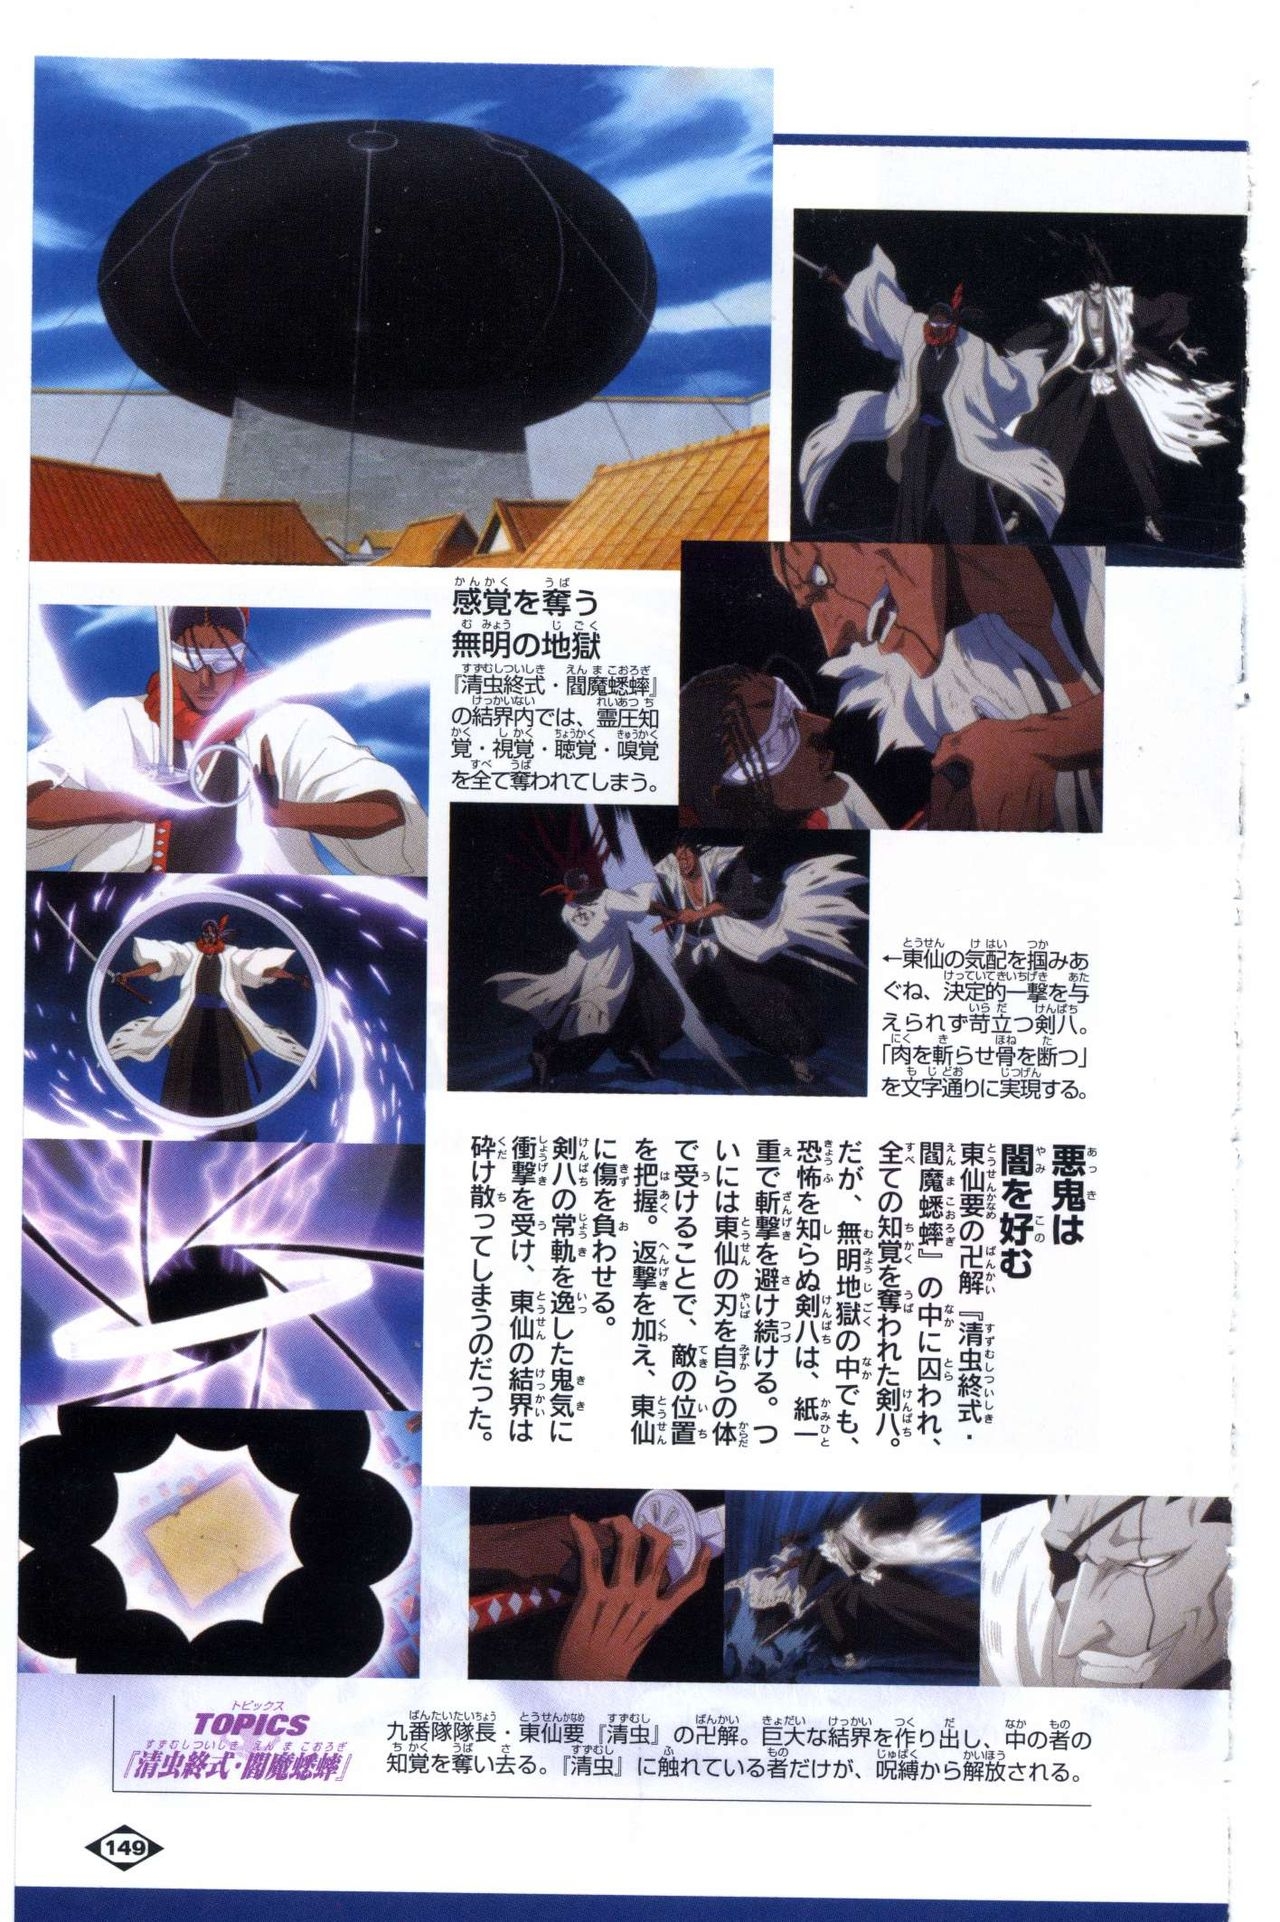 Bleach: Official Animation Book VIBEs 149